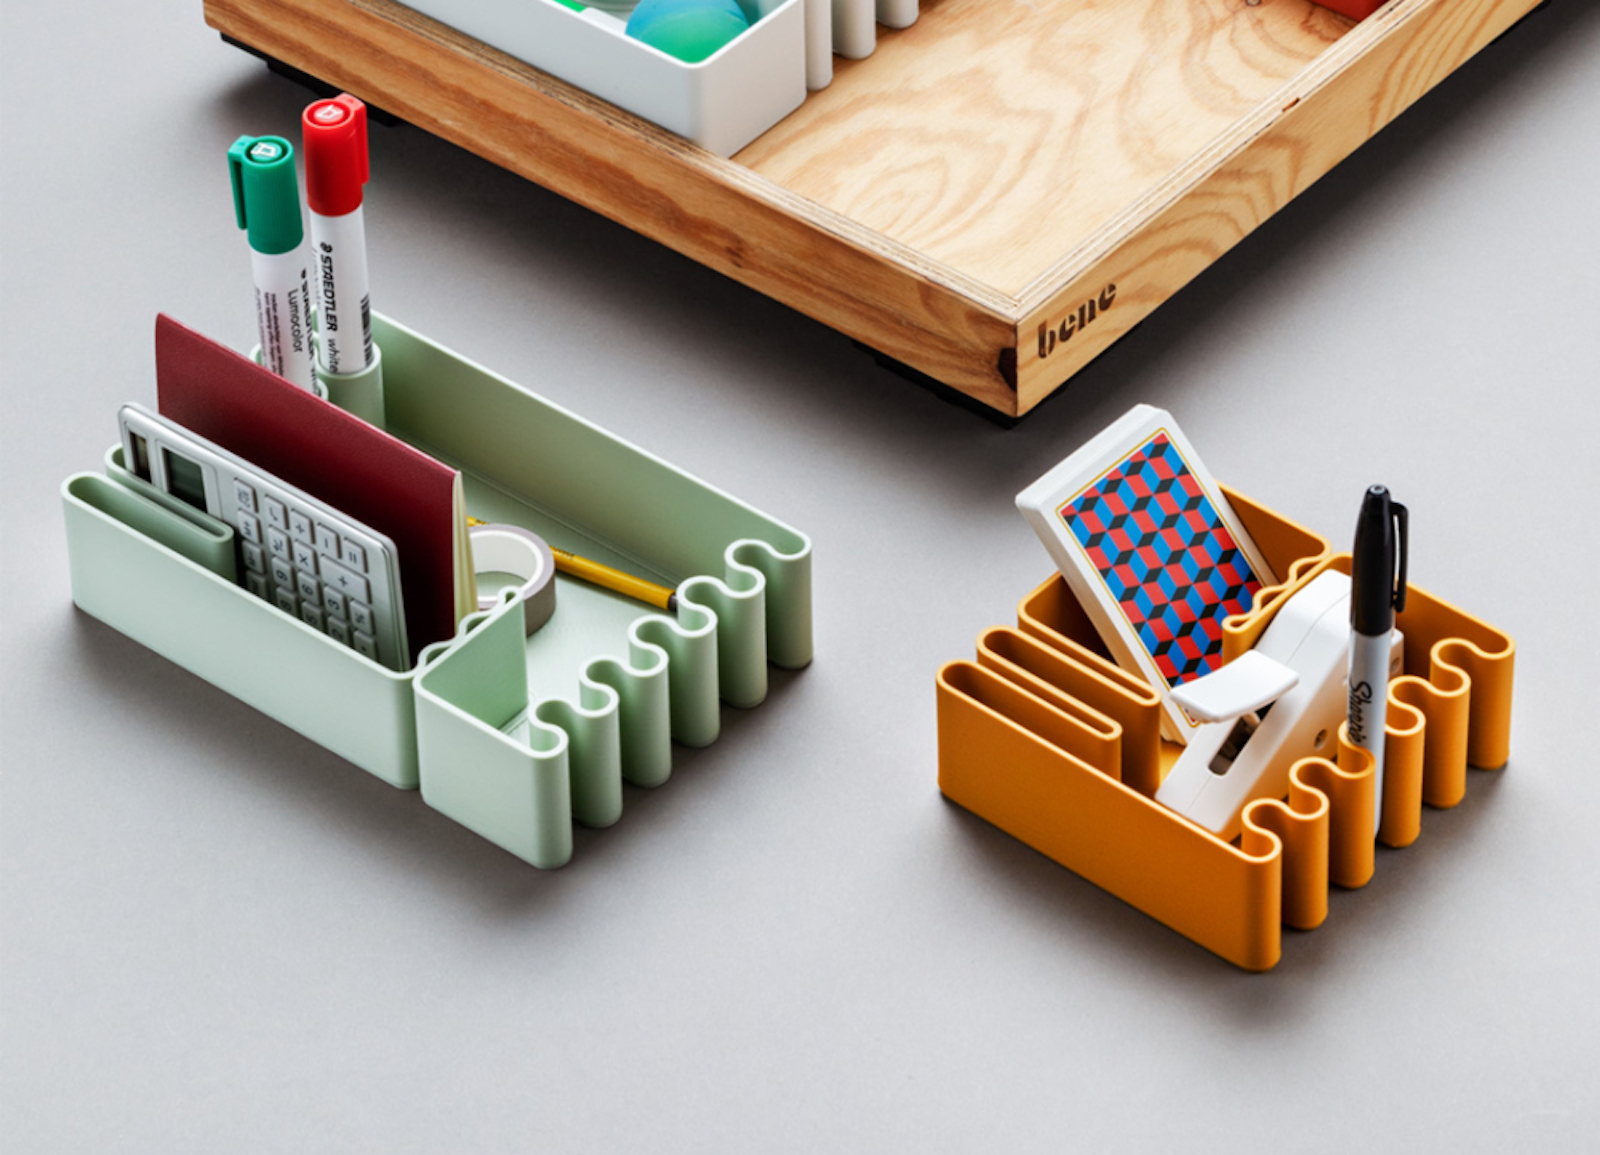 3D printed desk accessories by Bene